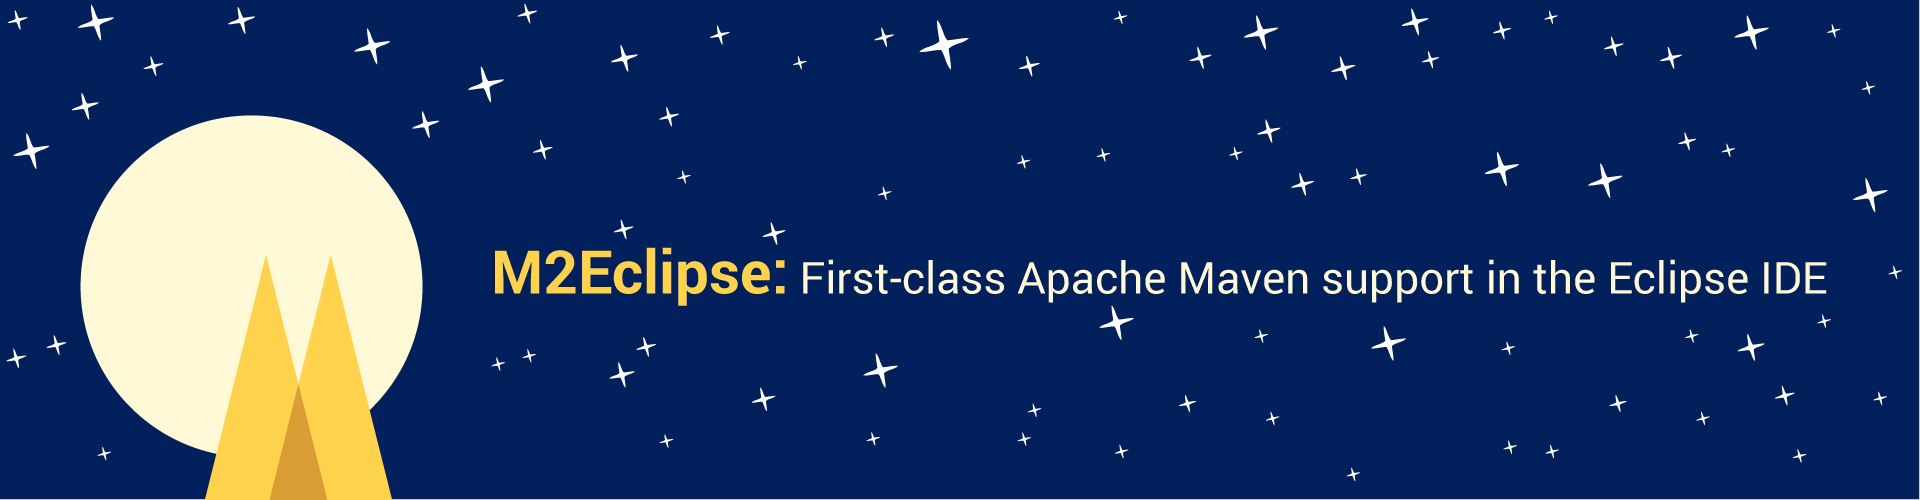 M2Eclipse: First-class Apache Maven support in the Eclipse IDE